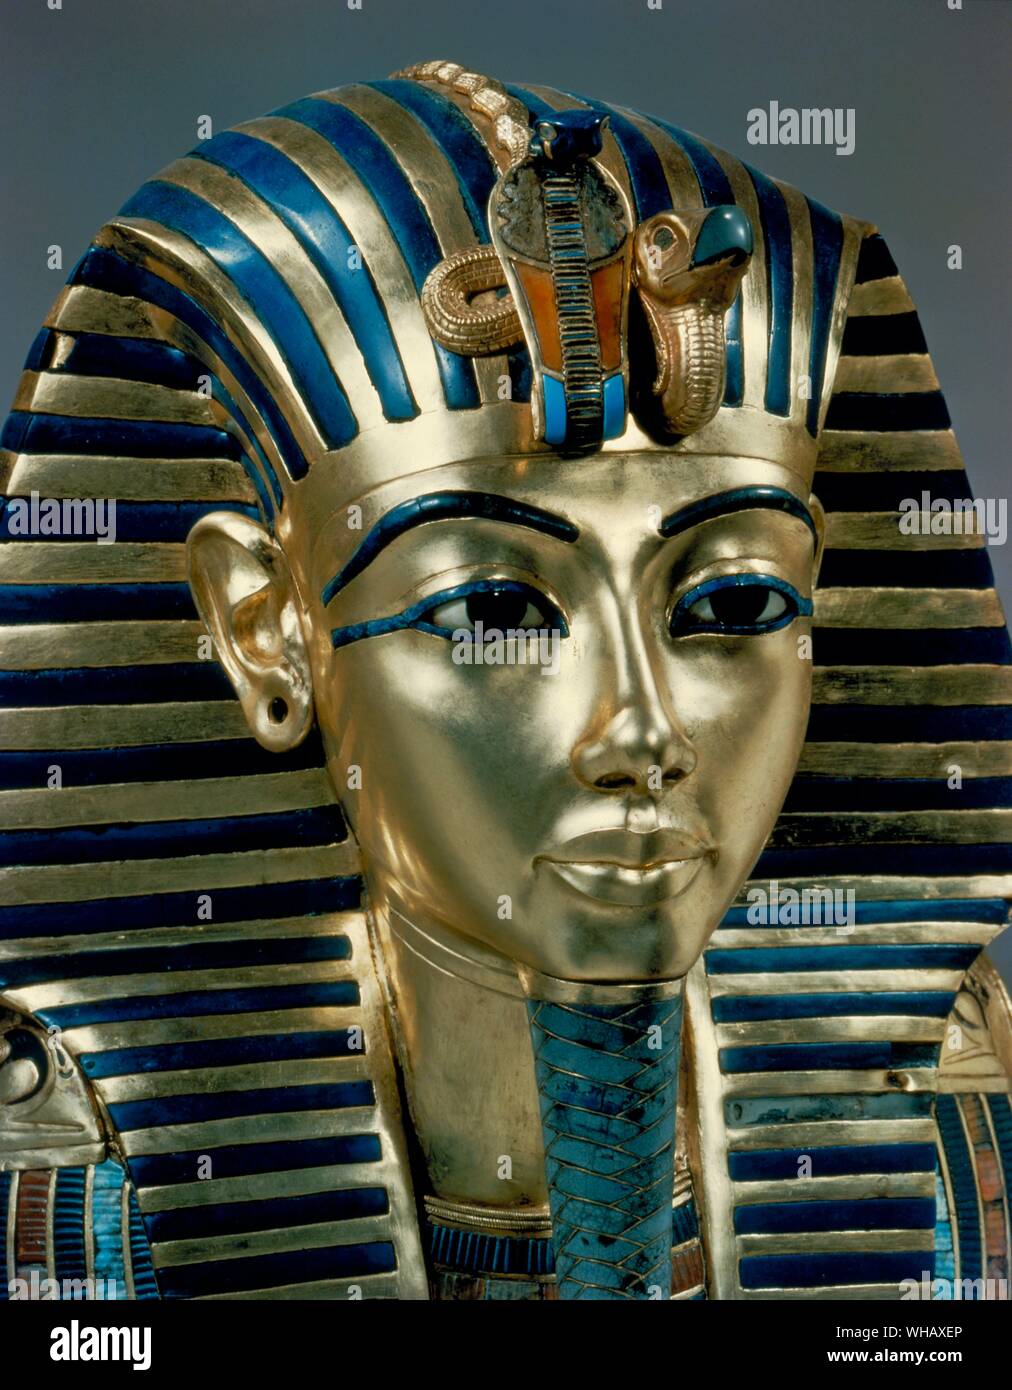 Tutankhamen - Tut Pl. 26 (XXVI) Gold Mask (found by Howard Carter). Tutankhamen's funeral mask in solid gold, inlaid with semi-precious stones and glass paste. Tukankhamen, by Christiane Desroches Noblecourt, The mask of Tutankhamen's mummy is now a popular icon for Ancient Egypt - the close-up of Tutankhamun's facial features as represented by 18th Dynasty artisans in the young king's death mask. The Egyptologist Howard Carter (employed by Lord Carnarvon) discovered Tutankhamun's tomb (since designated KV62) in The Valley of The Kings on November 4, 1922 near the entrance to the tomb of Stock Photo